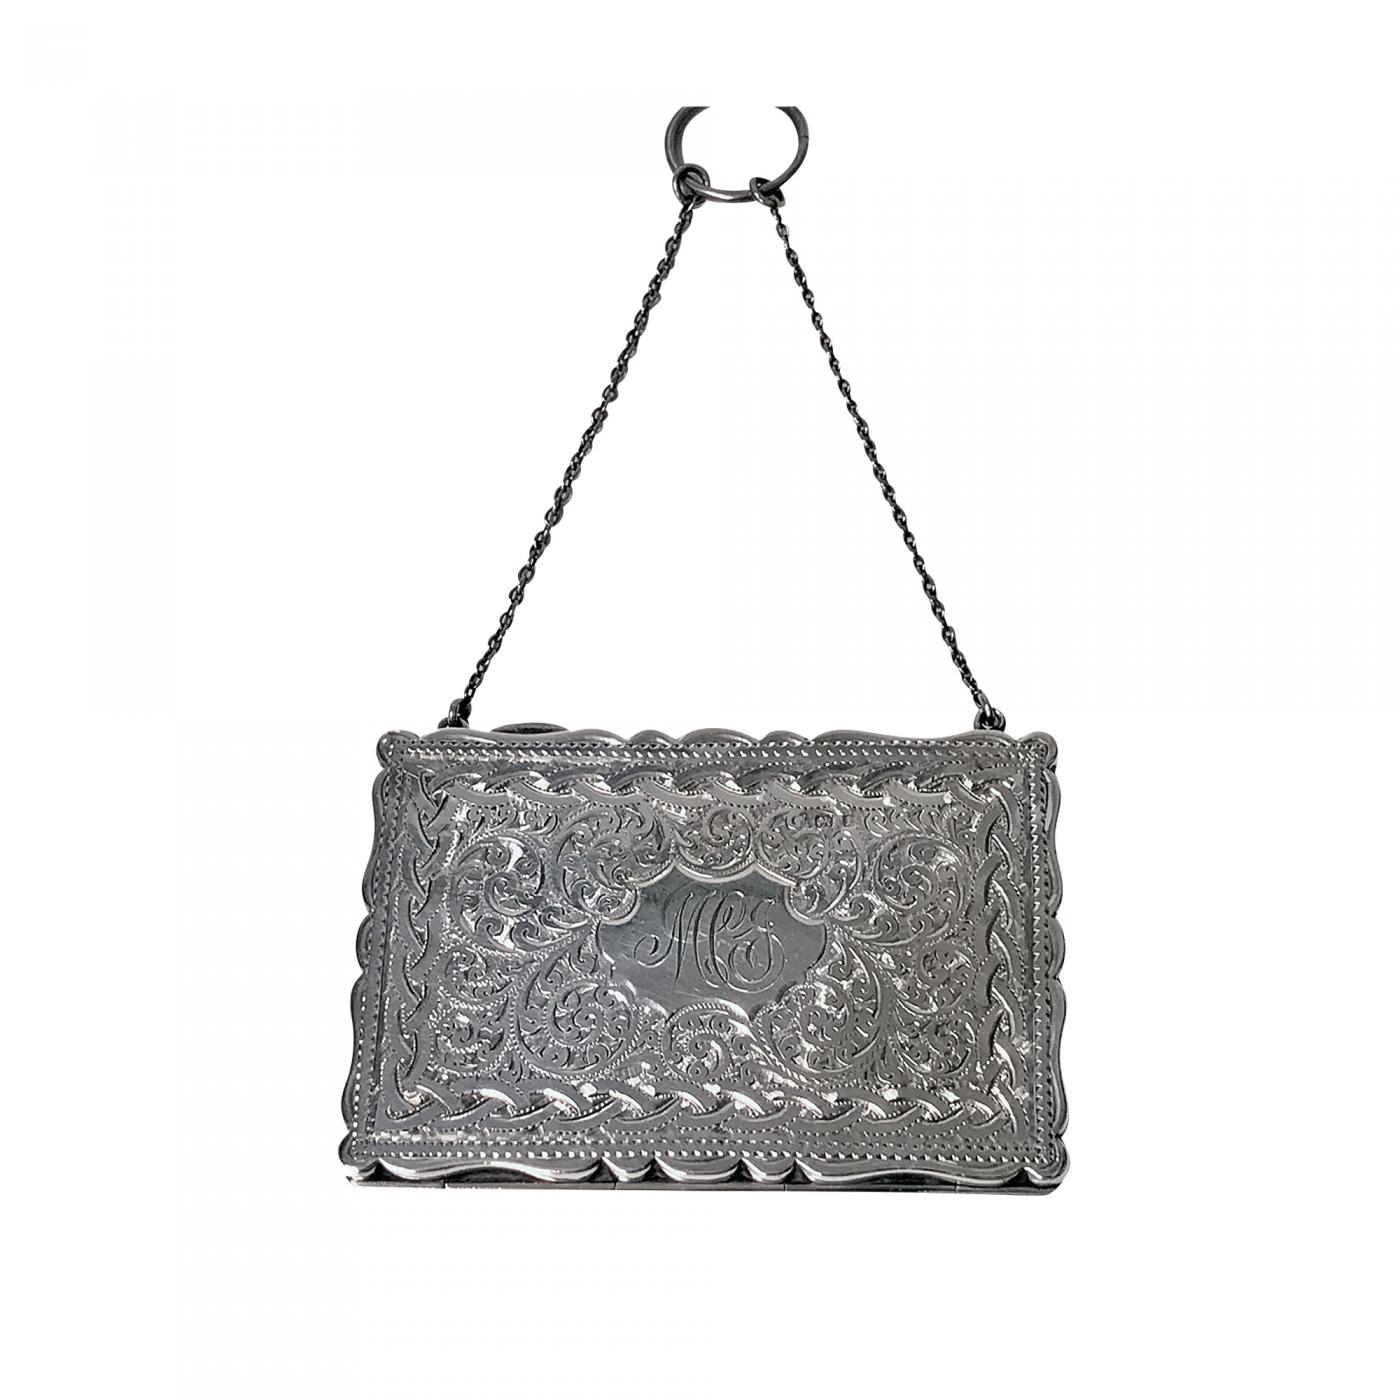 U.K. Victorian antique Silver purse with purple inner lining - Shop English  Antique Furniture Handbags & Totes - Pinkoi